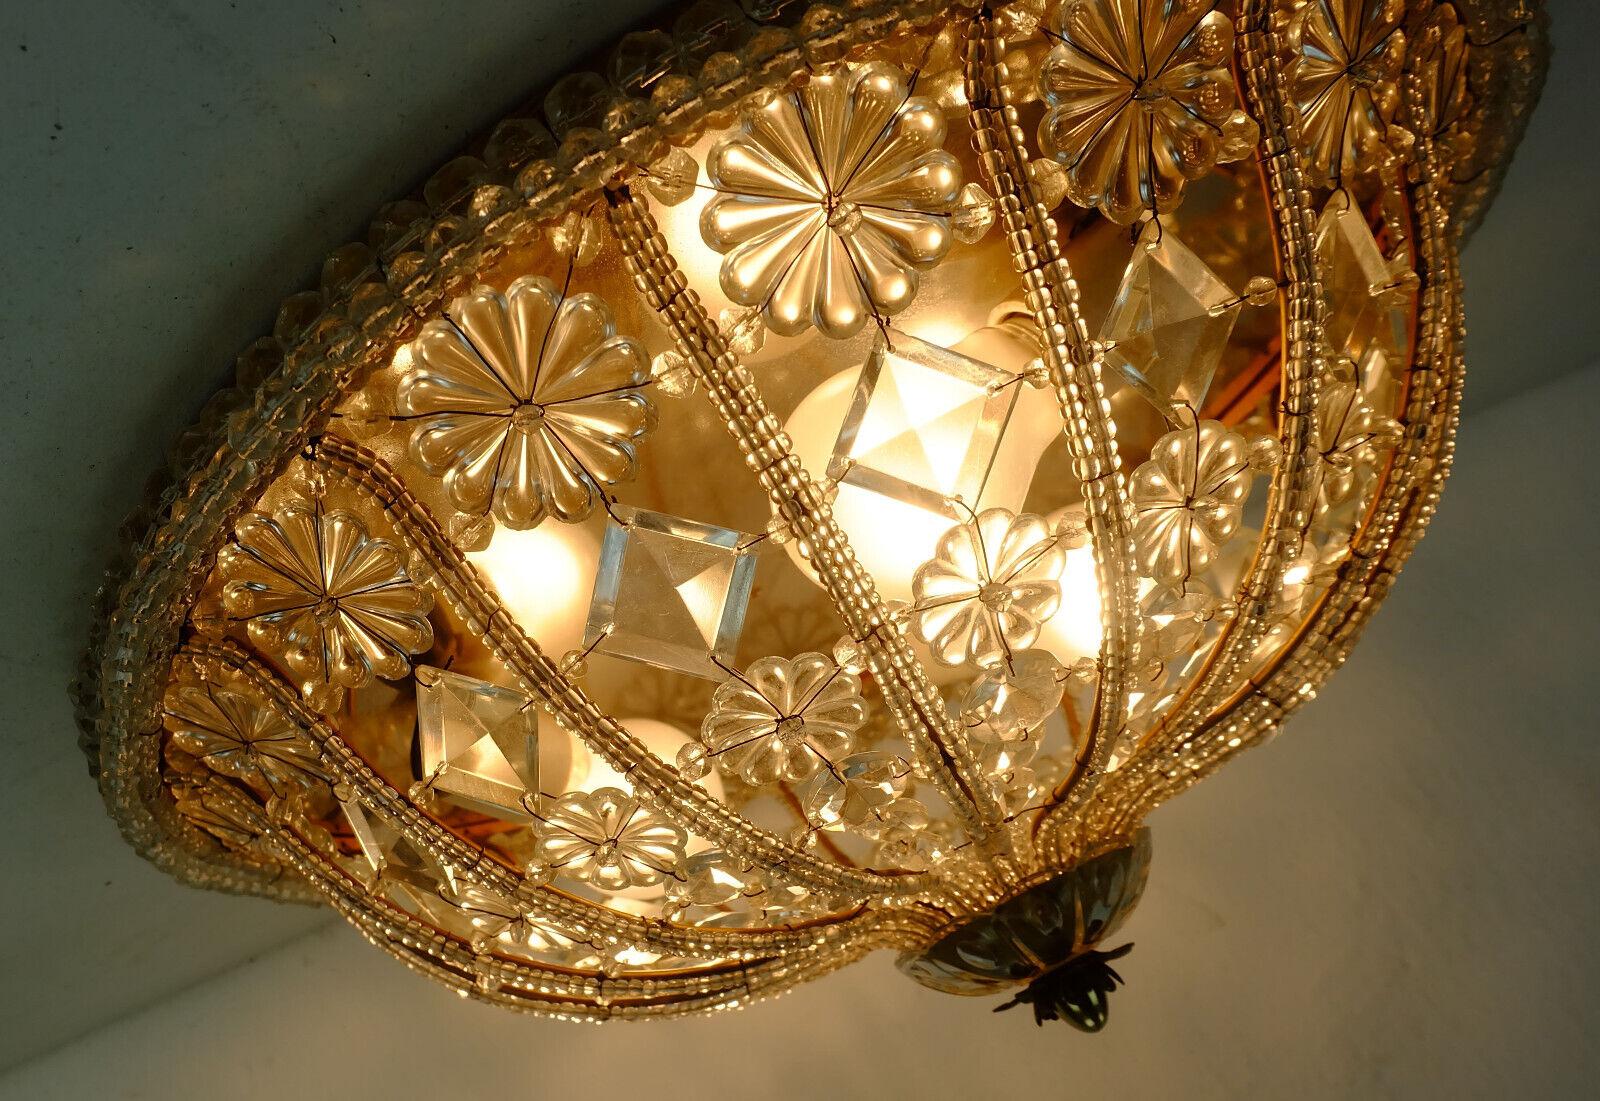 Large 1960s Ceiling Lamp Glass Crystals and Blossoms Hollywood Regency Stile For Sale 4